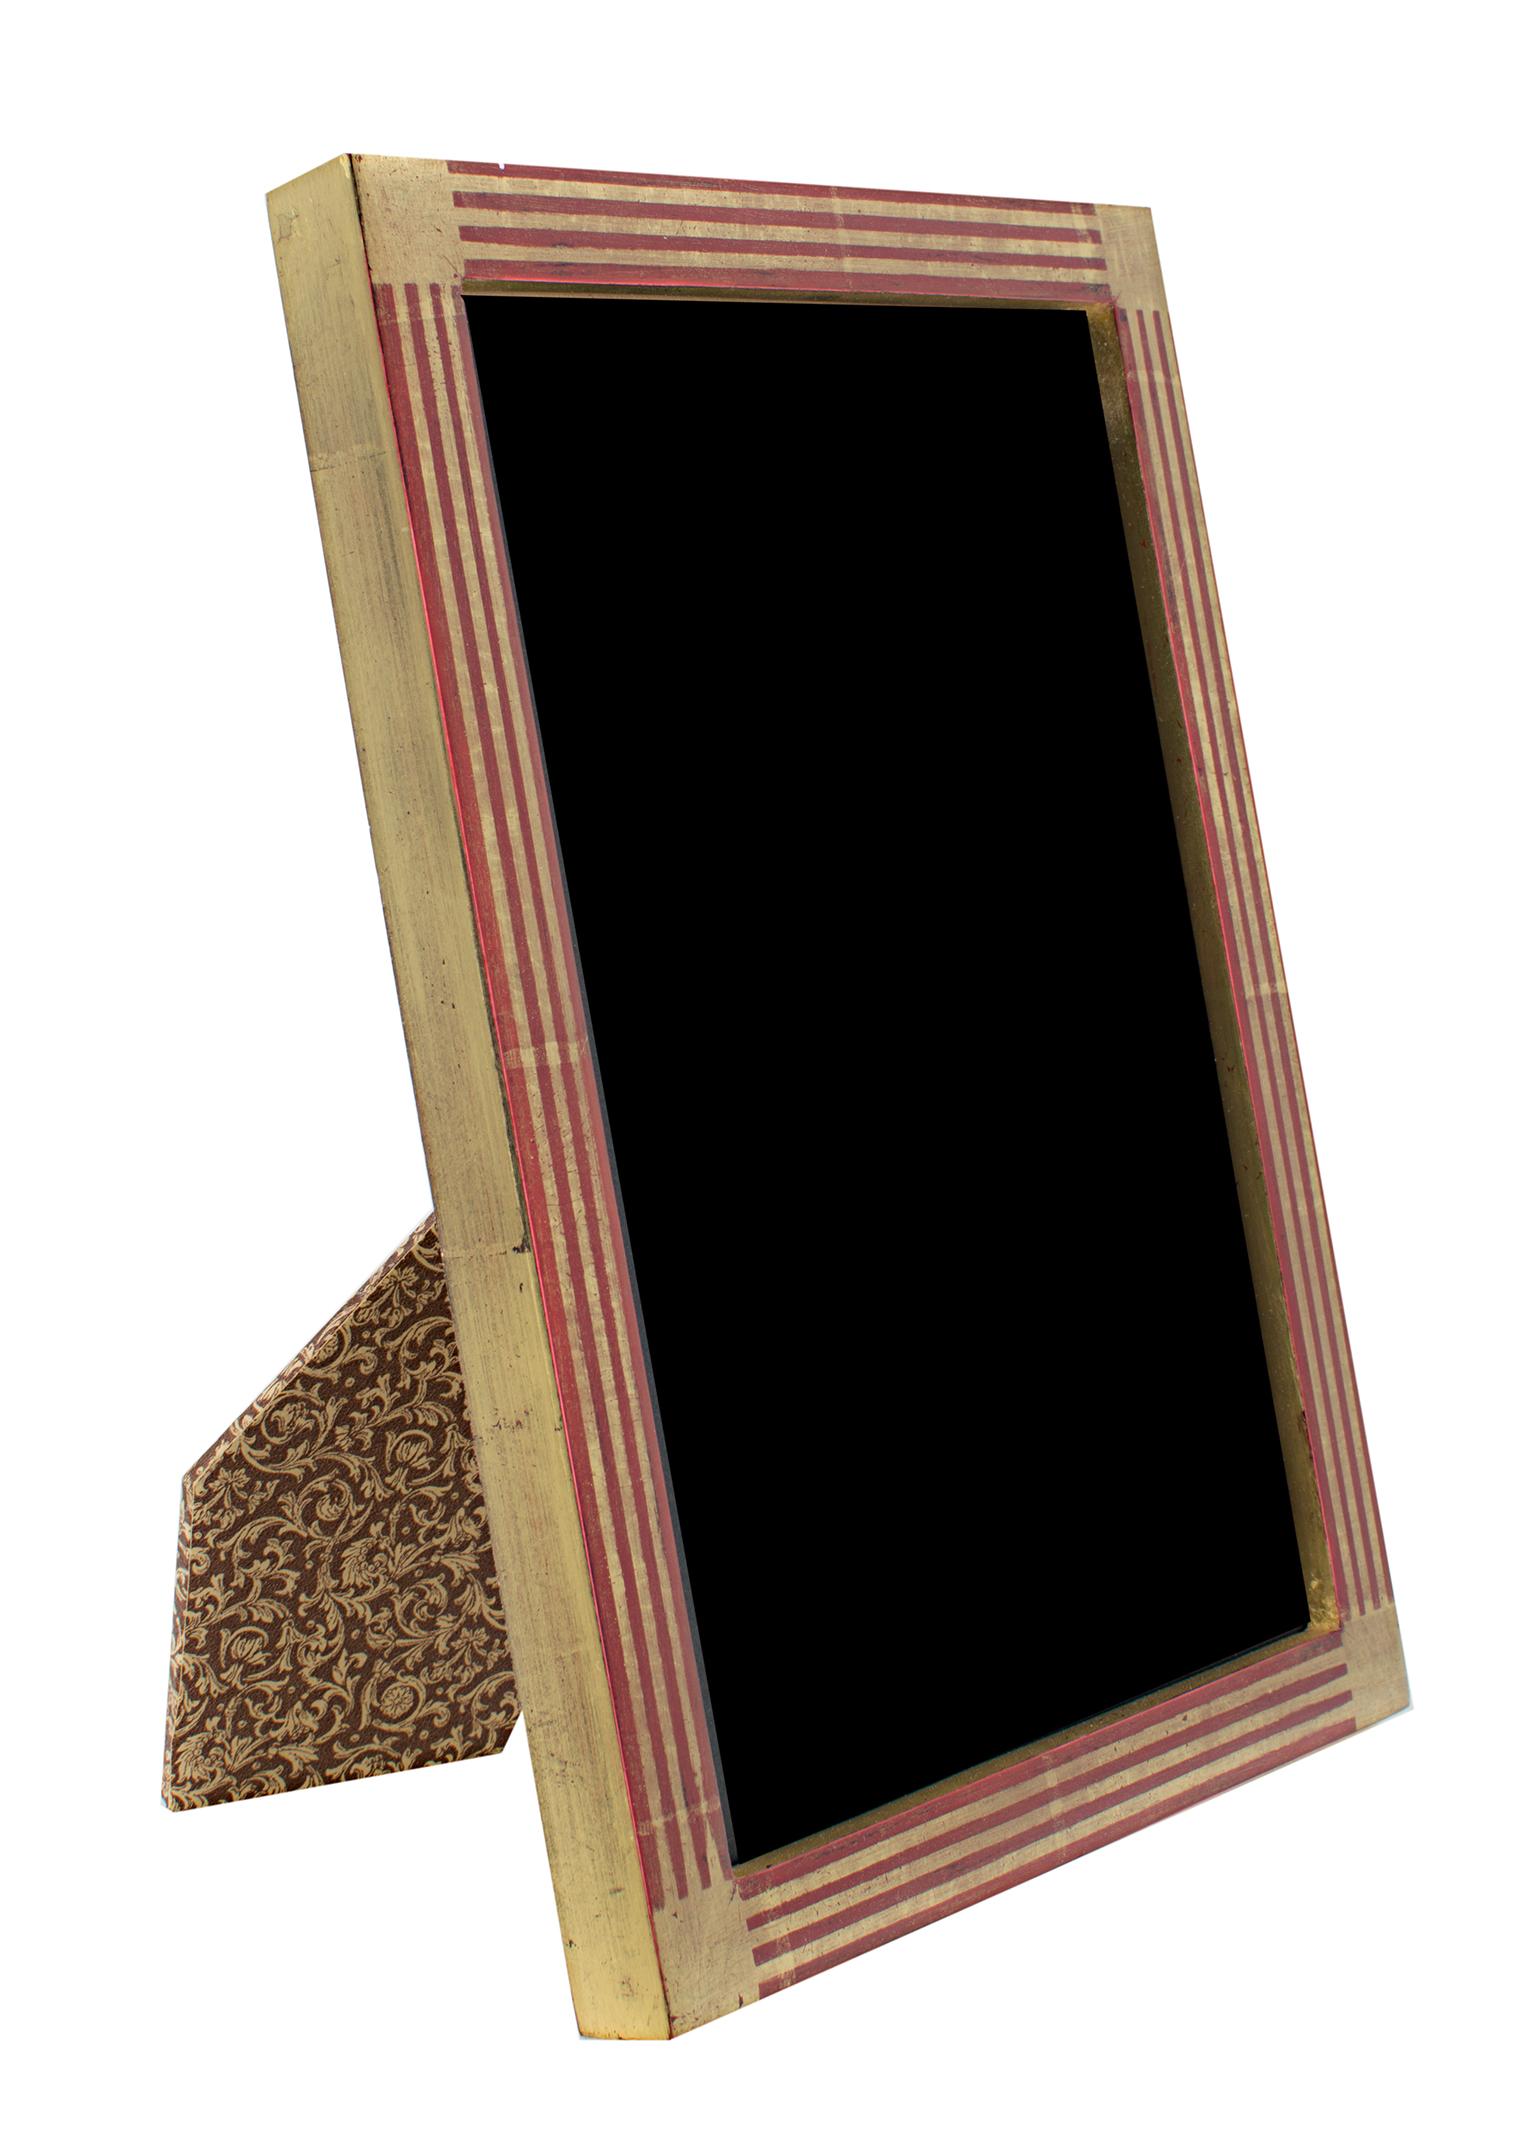 "Romanian Handmade Photo Frame, " 22K Gold Leaf & Wood 5 x 7 in Frame - Art by Unknown